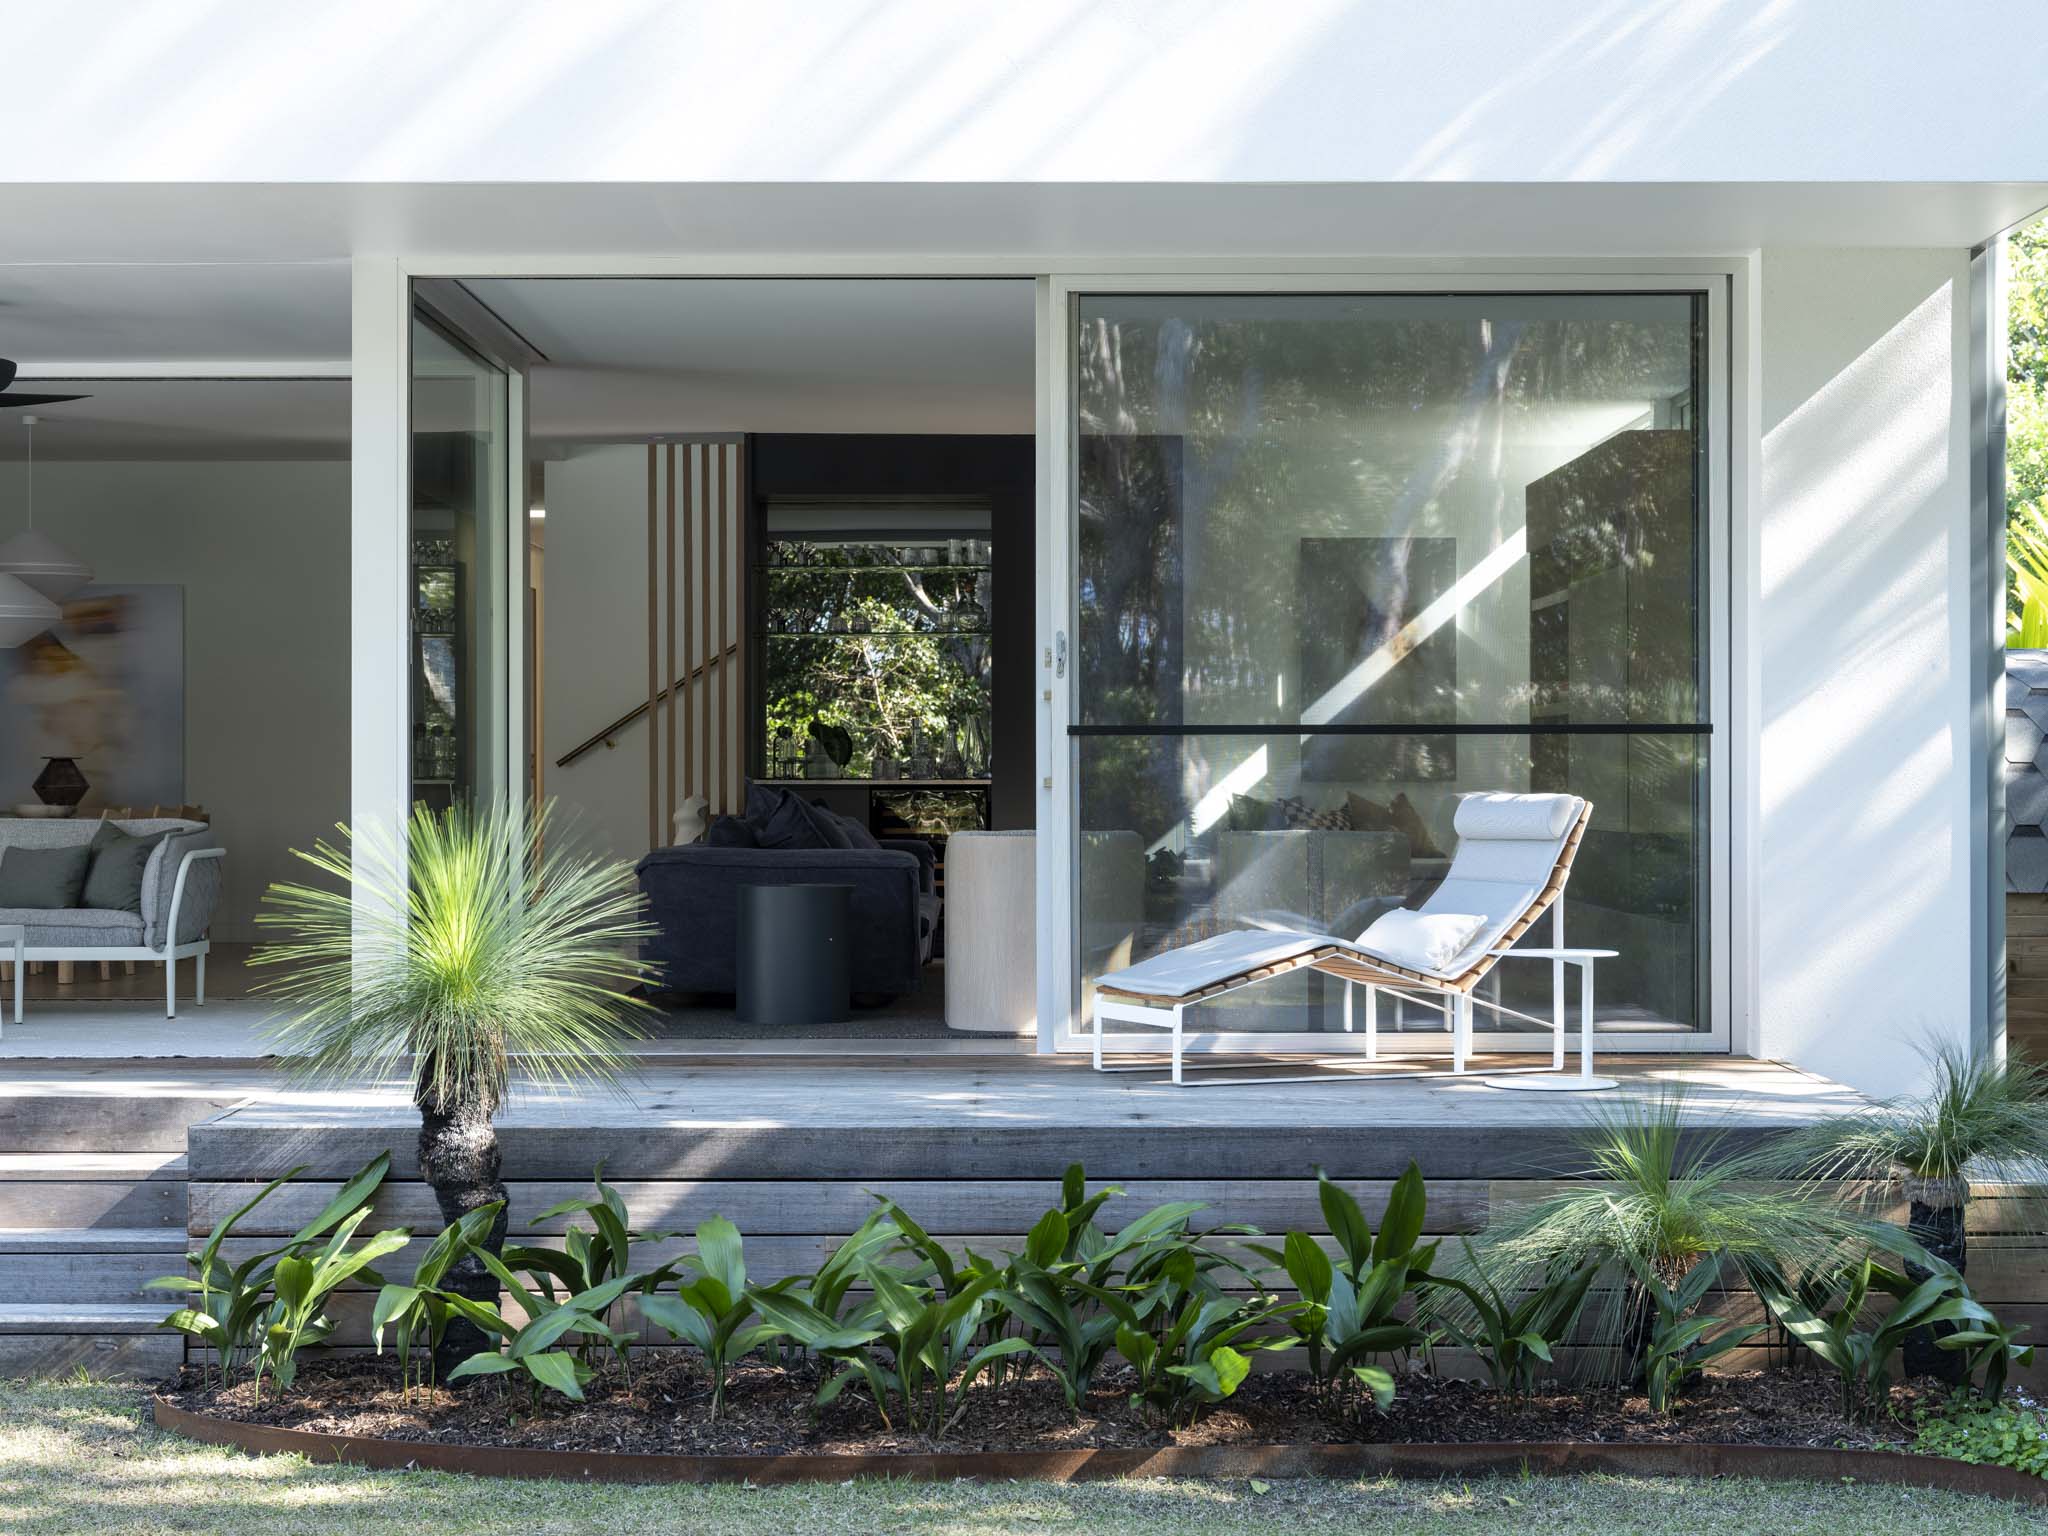 Kasa Byron Bay. Photography by Tom Ferguson. Timber patio opening up from interior living space.  White reclining deck chair. Garden bed below deck. 